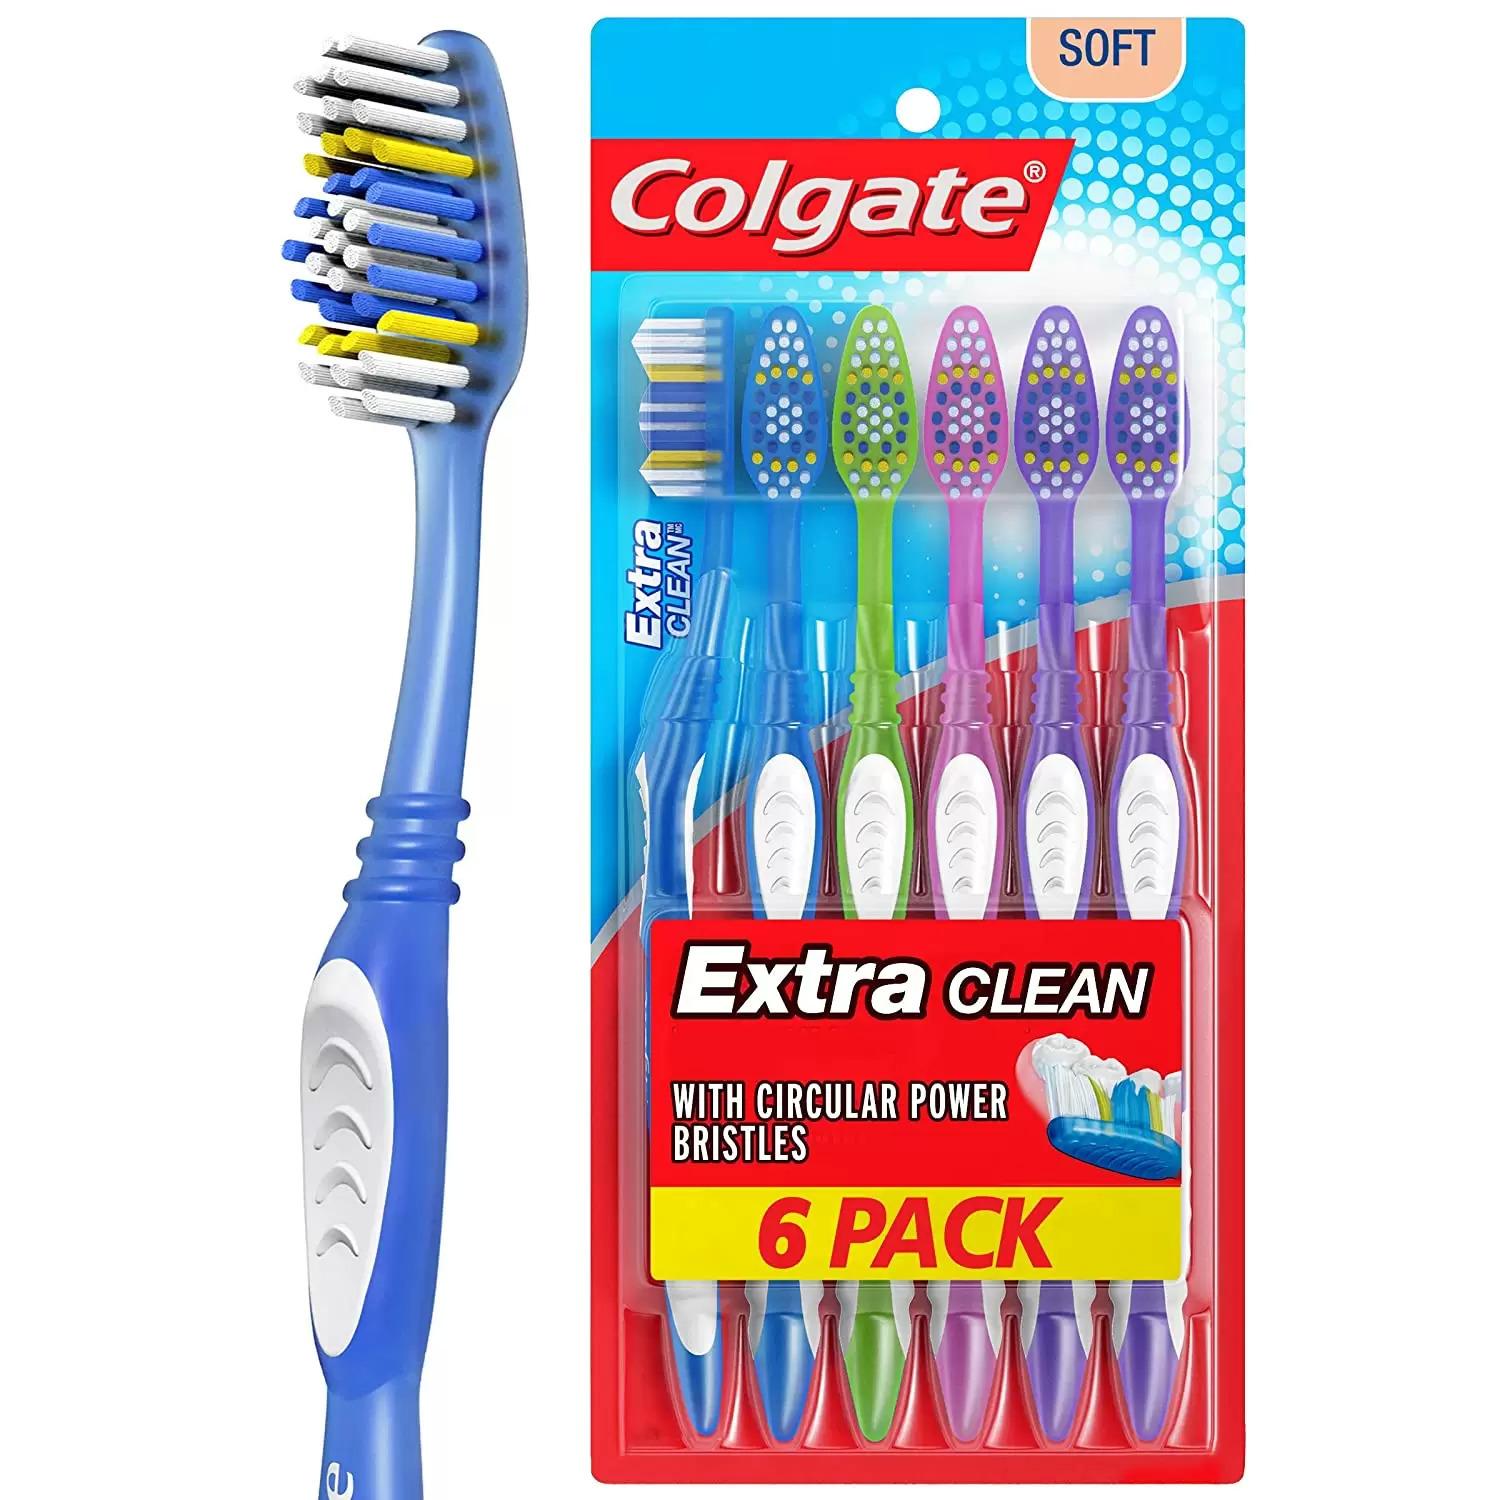 6 Colgate Extra Clean Full Head Soft Toothbrush for $3.07 Shipped